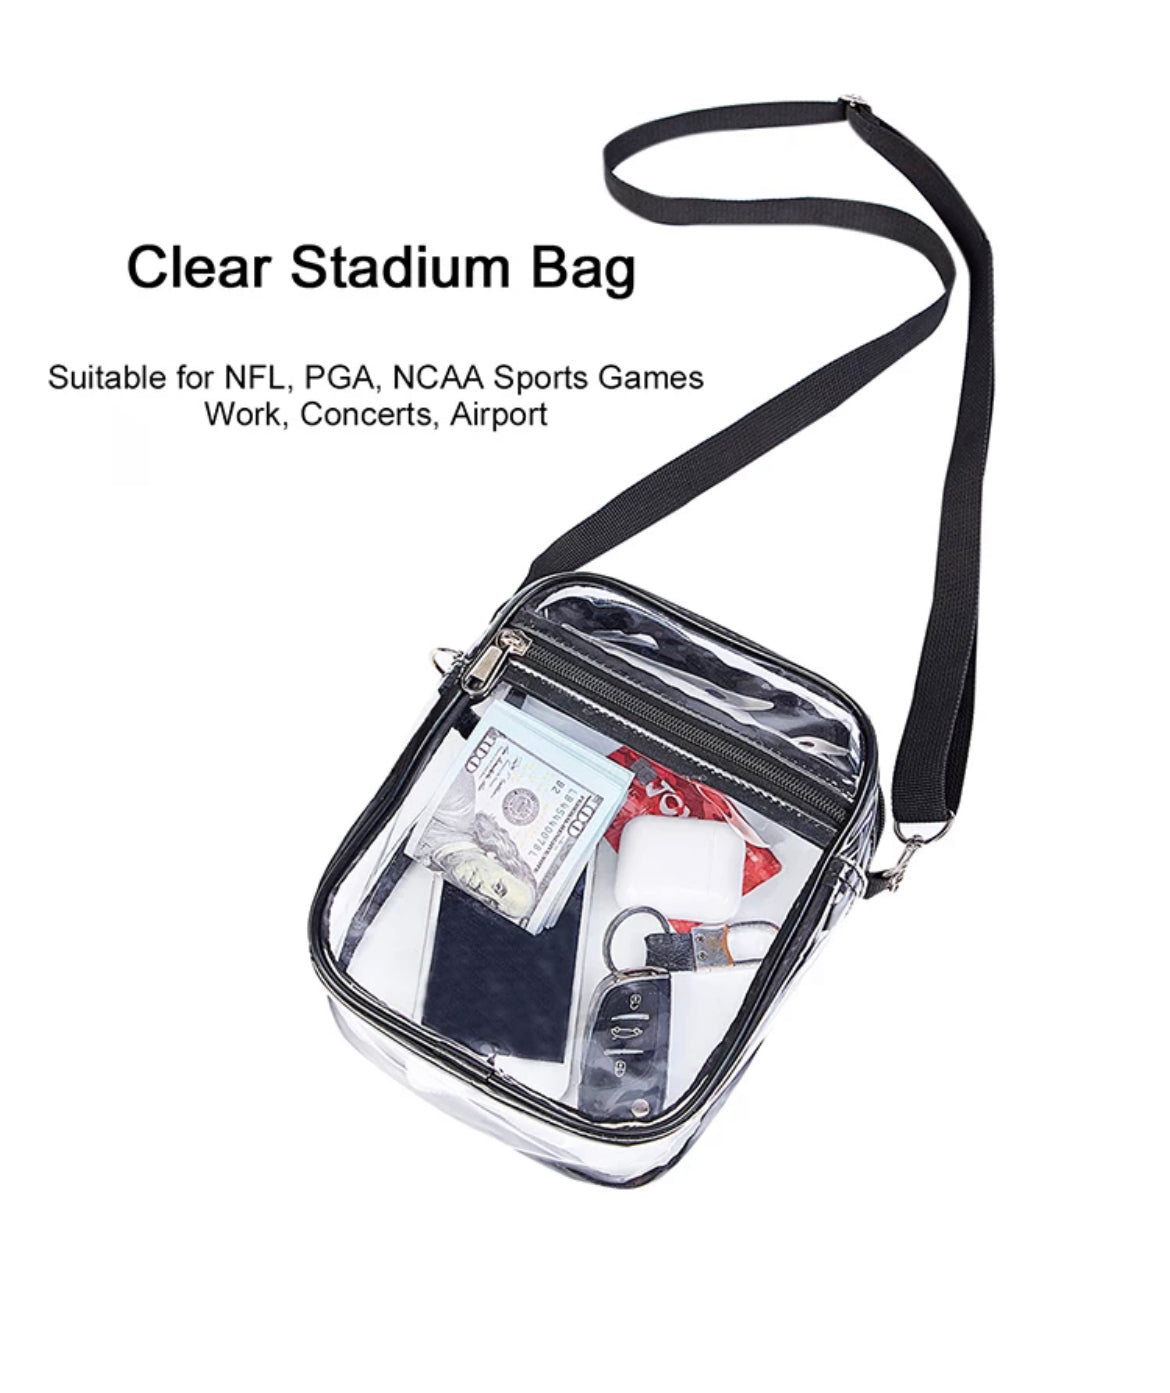 Take Me Out to the Ball Game Clear Crossbody Stadium Bag - Navy GG